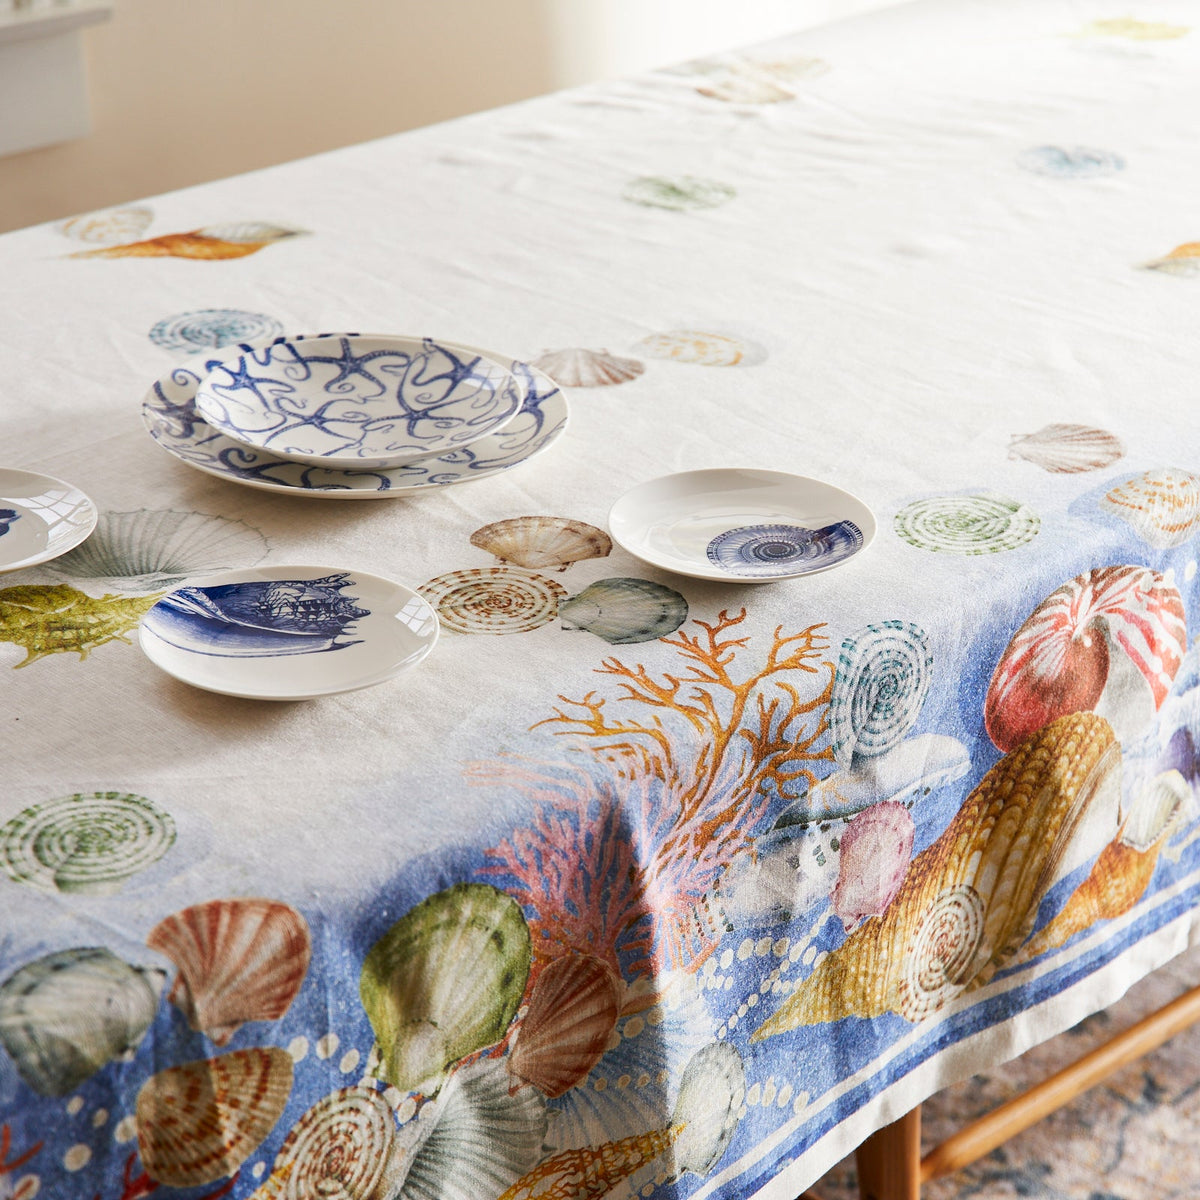 Sanibel Tablecloth in Linen with Shells and Coral from Caskata